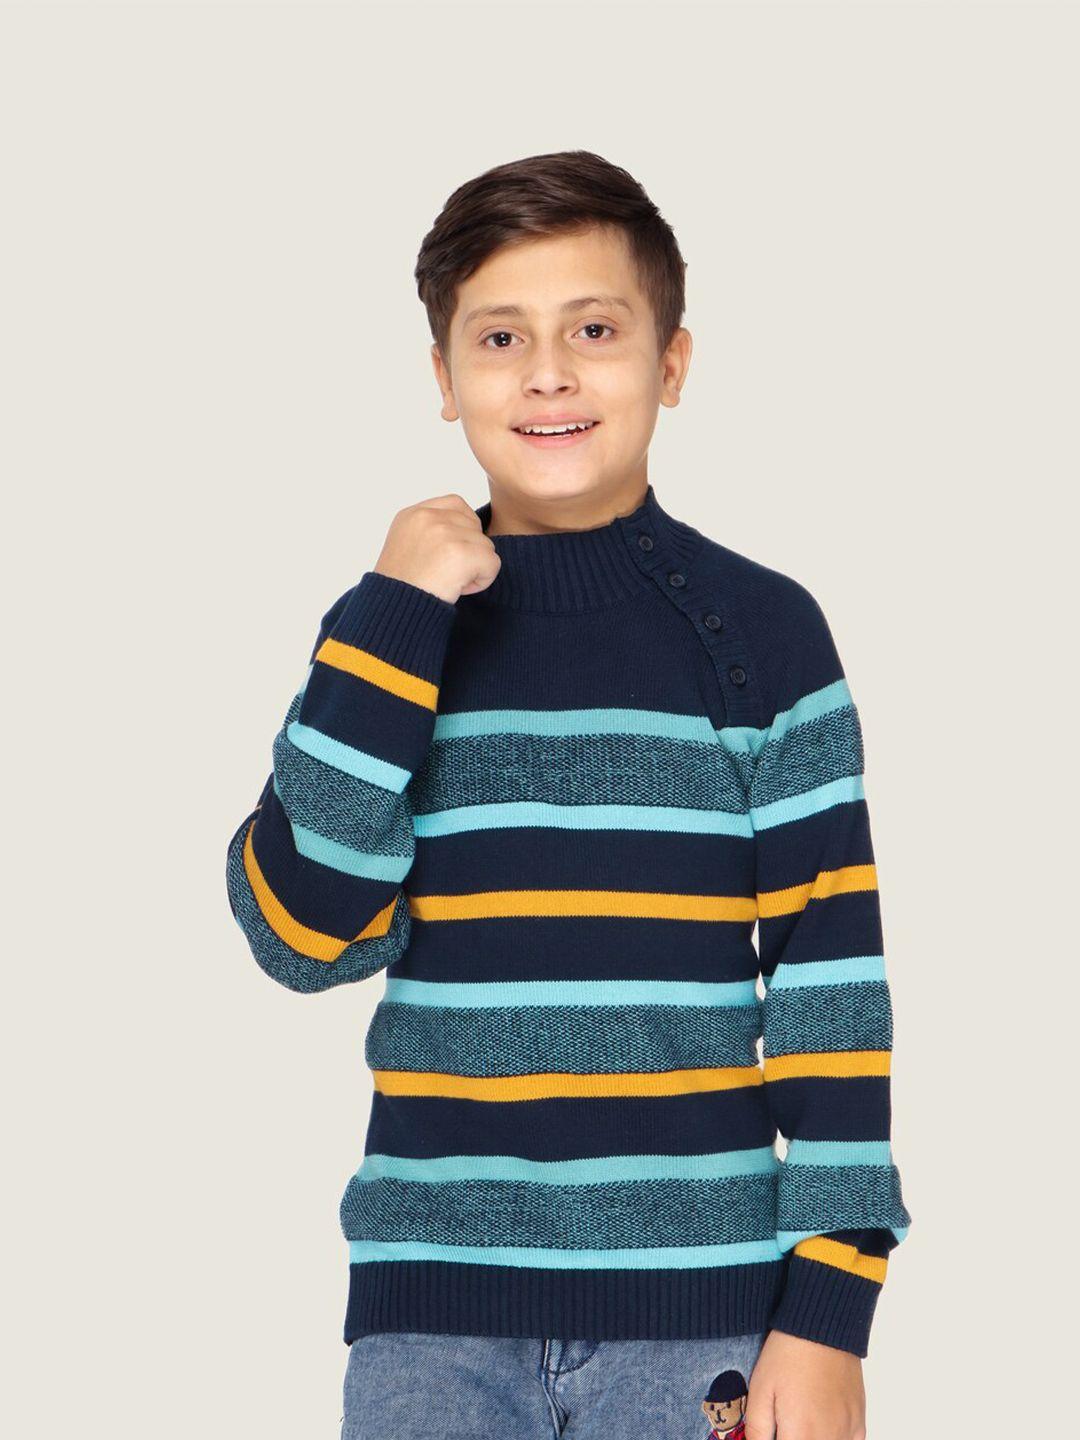 lasnak boys navy blue & yellow striped cotton pullover sweater